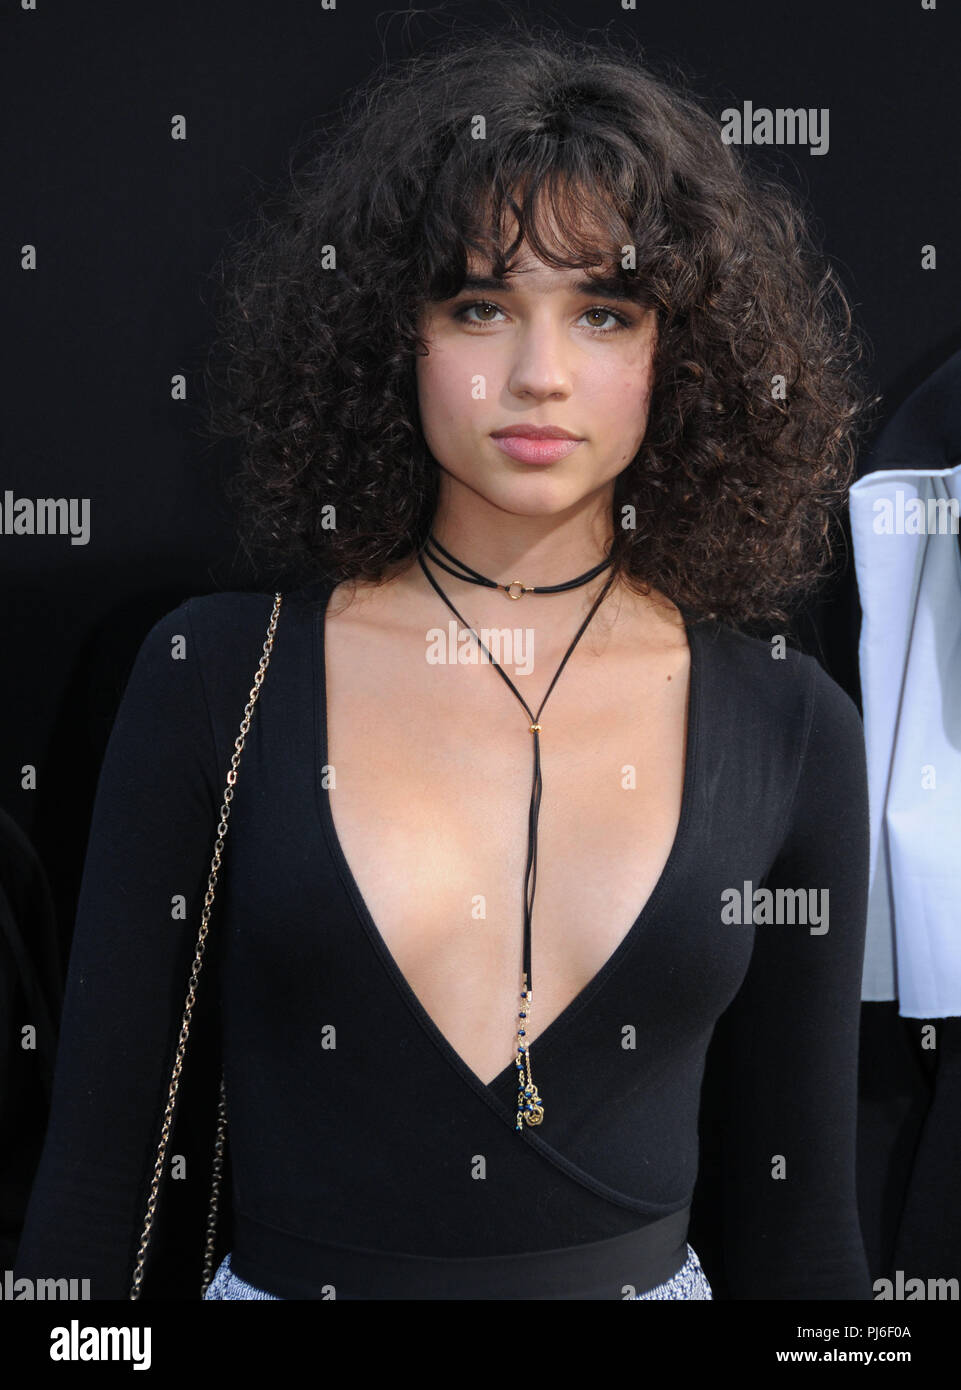 Los Angeles, California, USA. 4th September, 2018. Model/influencer Lulu De  Freitas attends a New Line Cinema Presentation, an Atomic Monster/Safran  Company production, the World Premiere of 'The Nun' on September 4, 2018